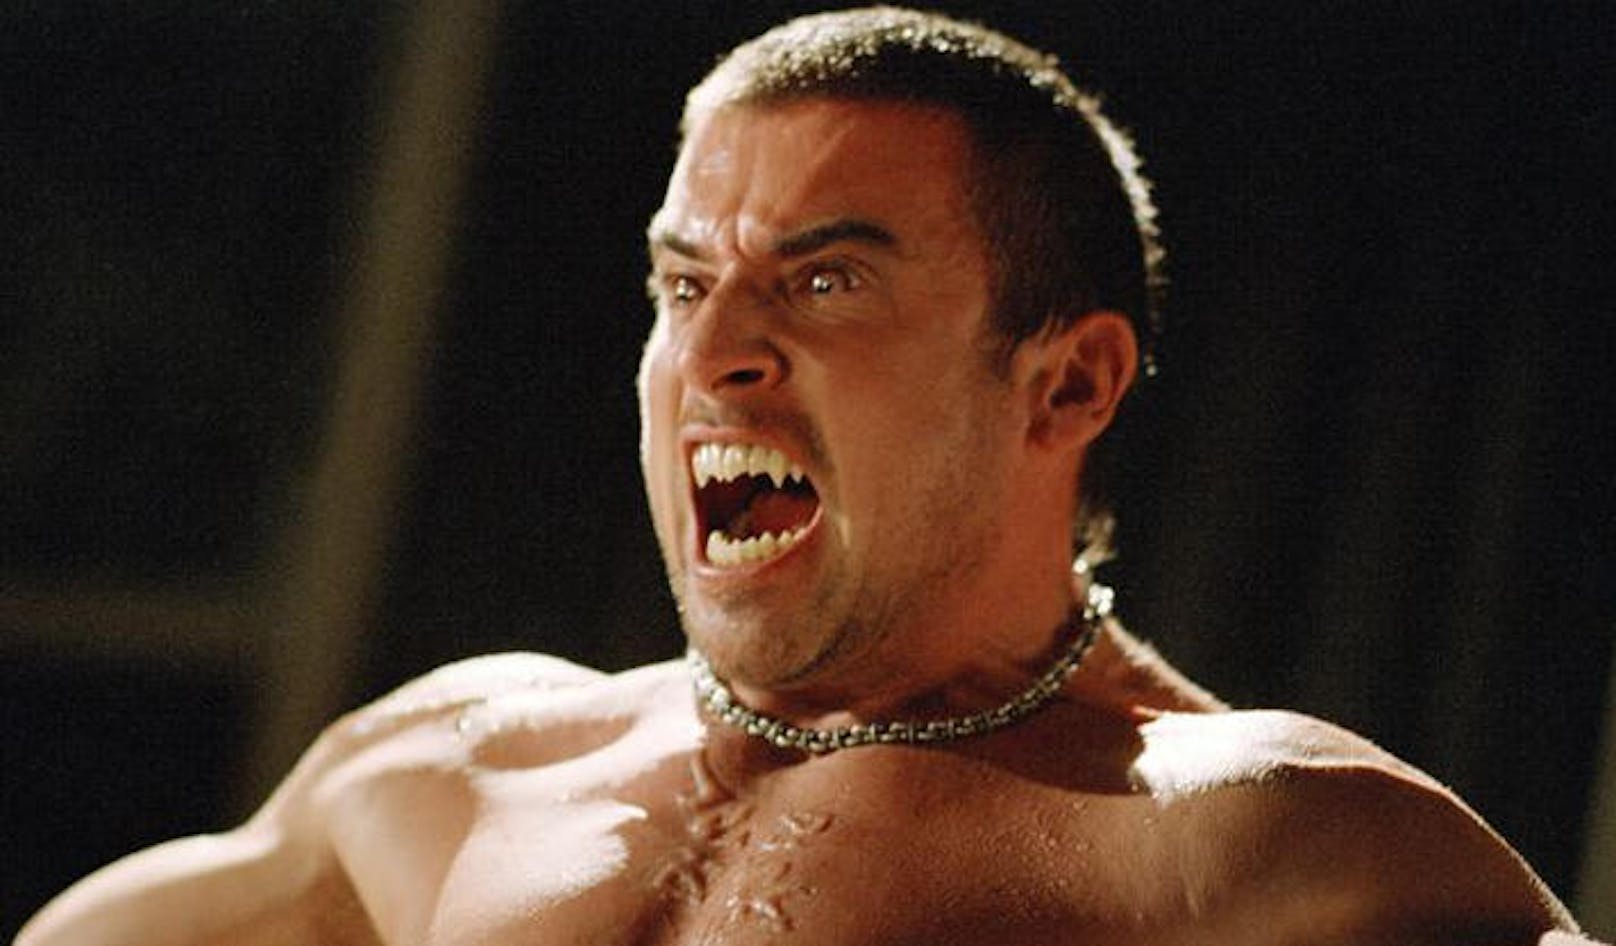 Dominic Purcell als Drake alias Dracula in "Blade: Trinity".